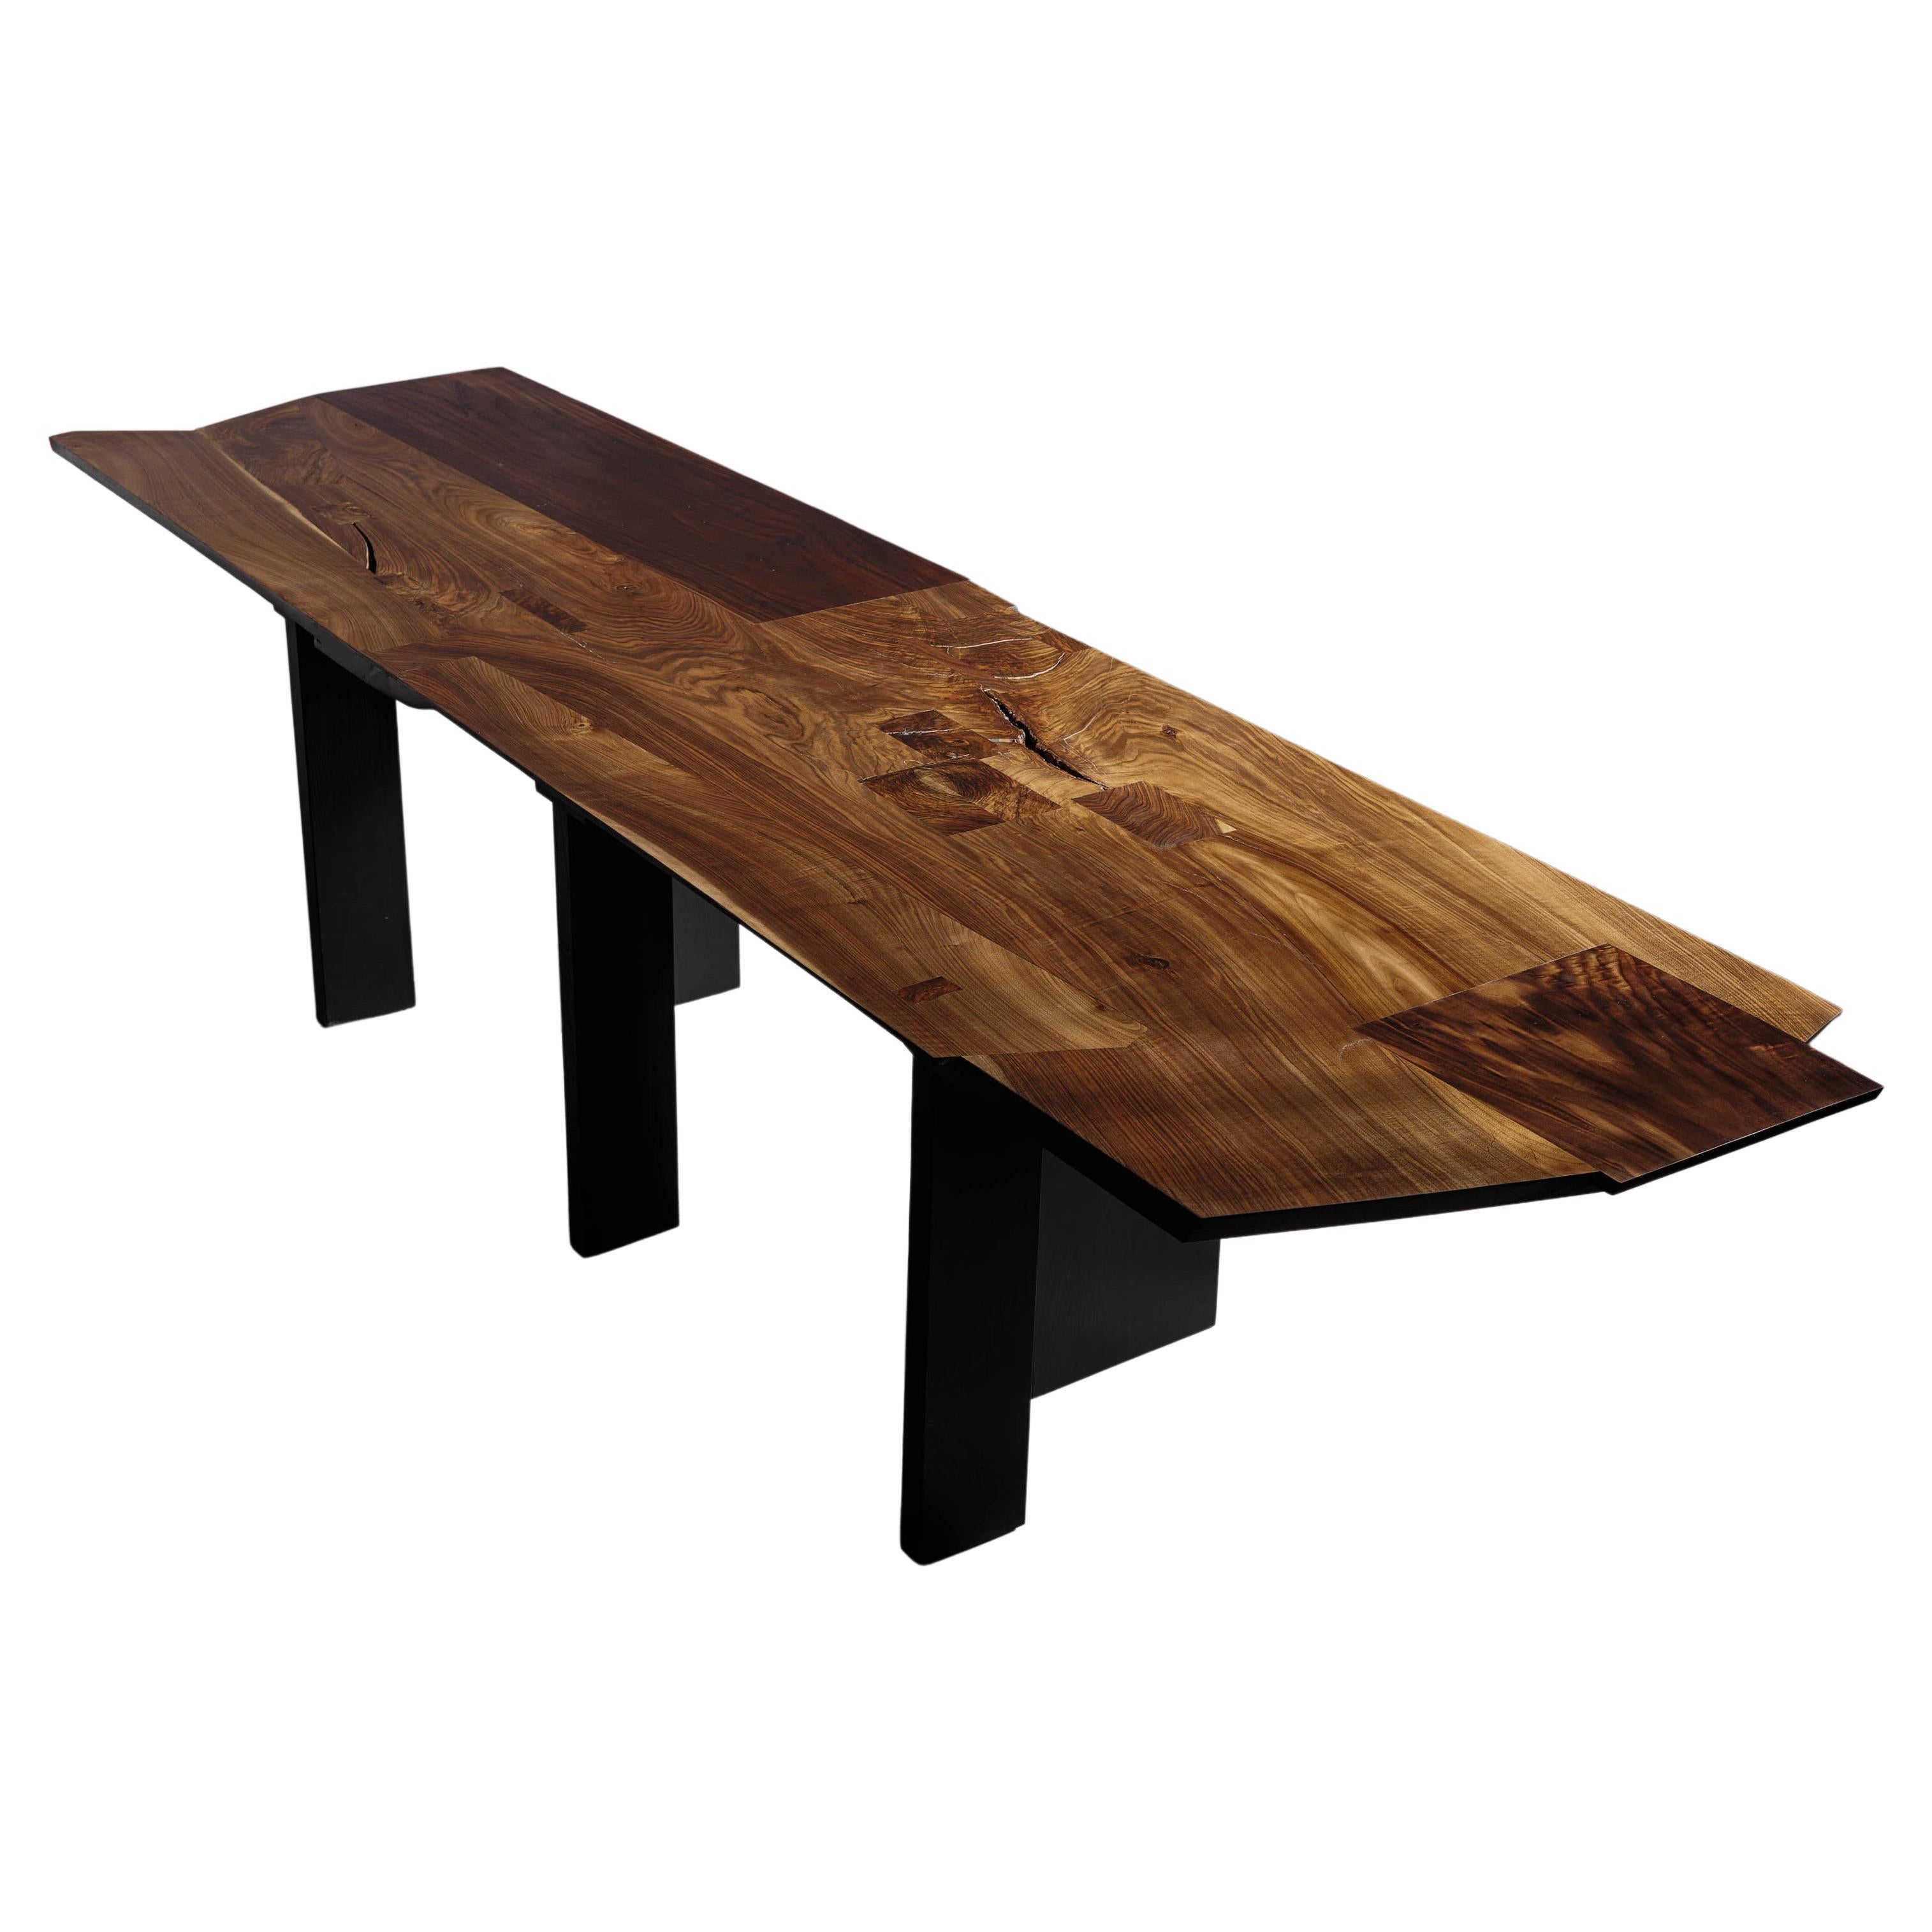 Eero Moss Walnut Sculptural Dining Table, EM203 For Sale